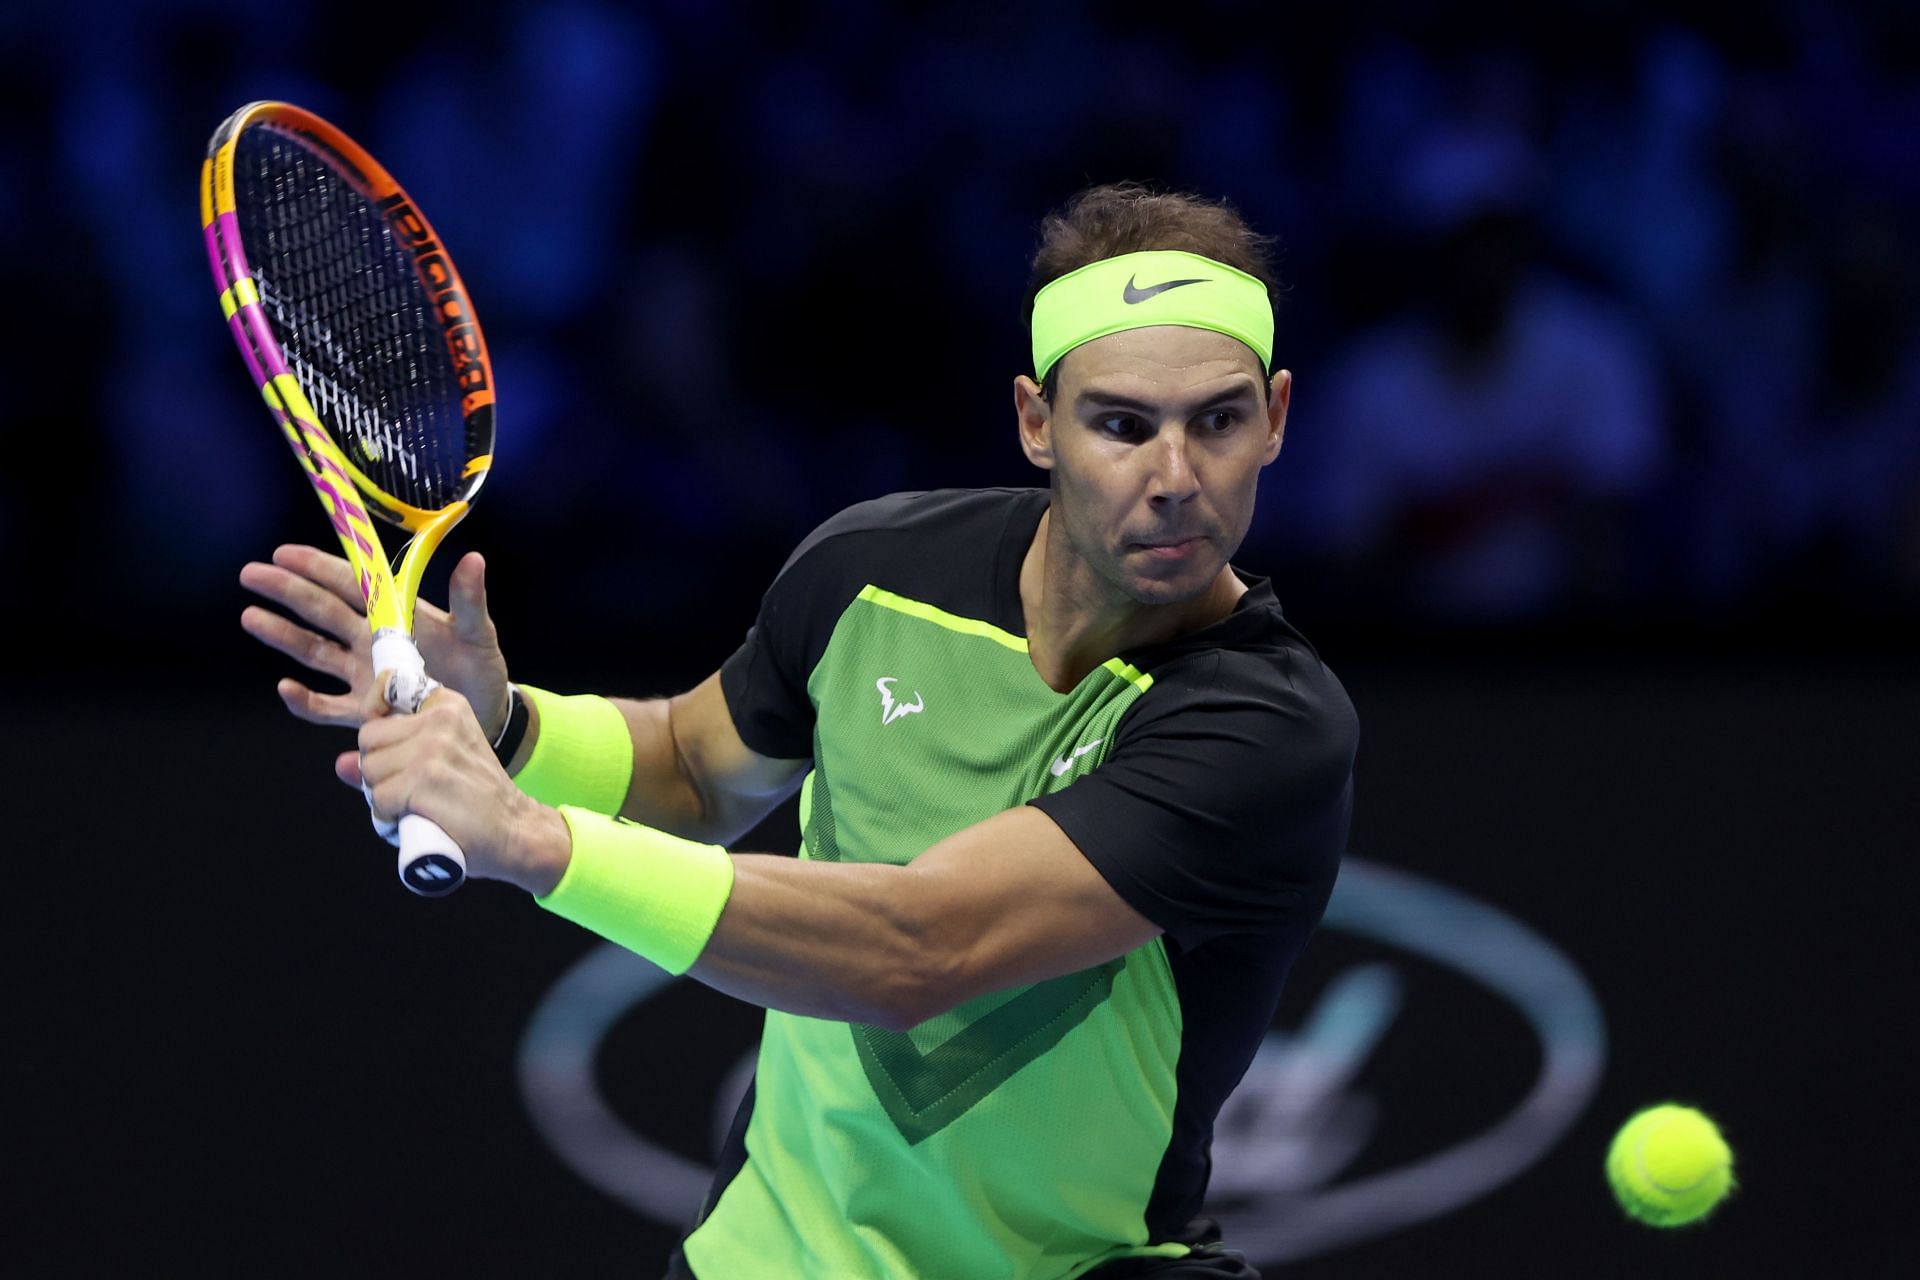 Rafael Nadal in action against Taylor Fritz at the 2022 ATP Finals